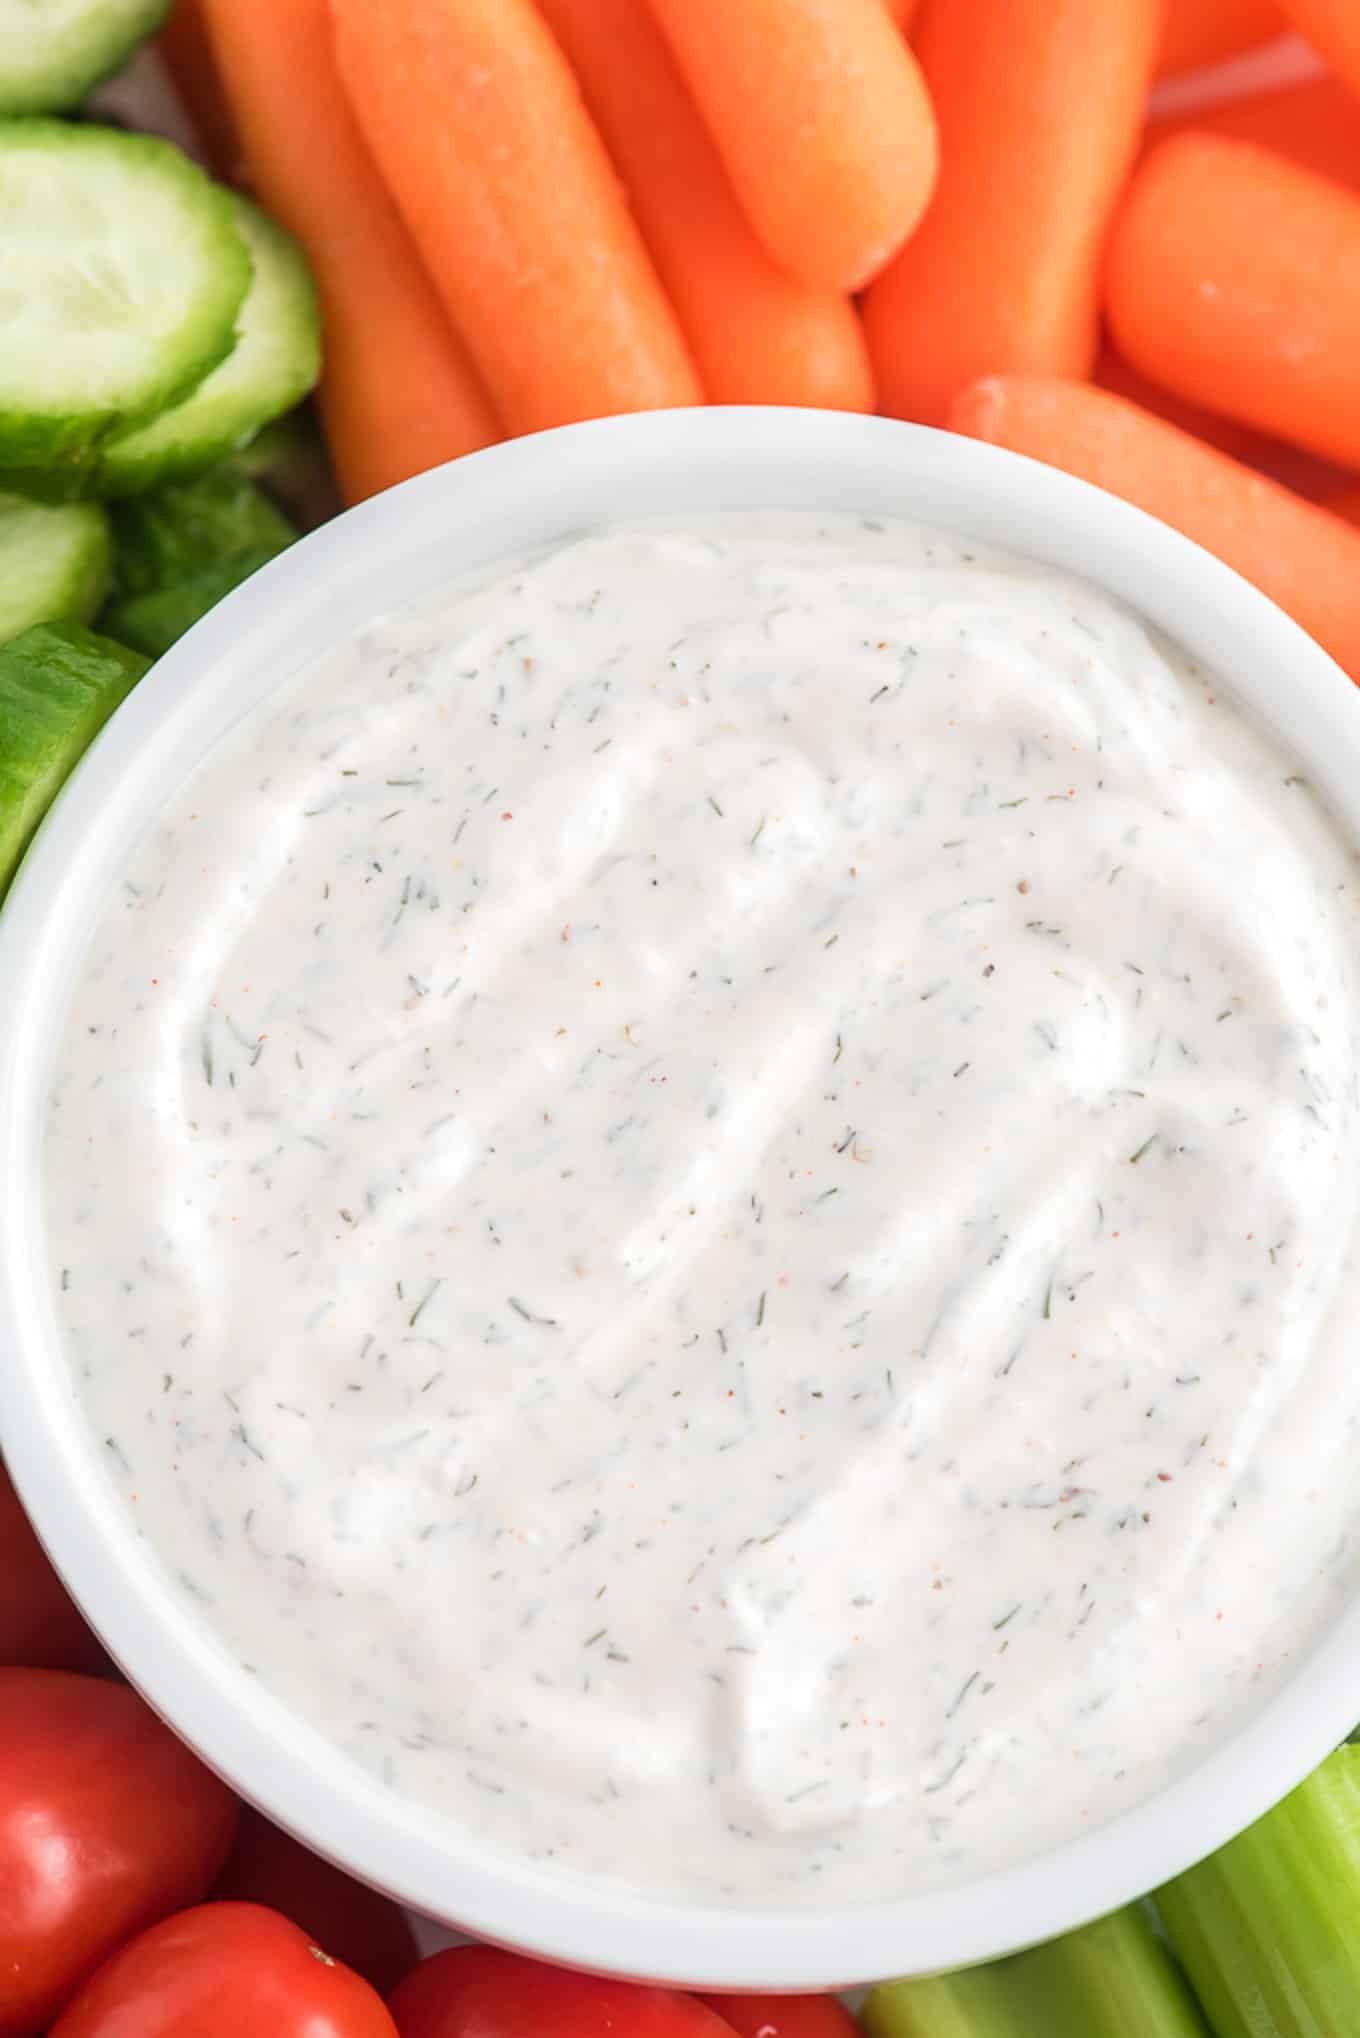 Veggie dip made with sour cream and dill.